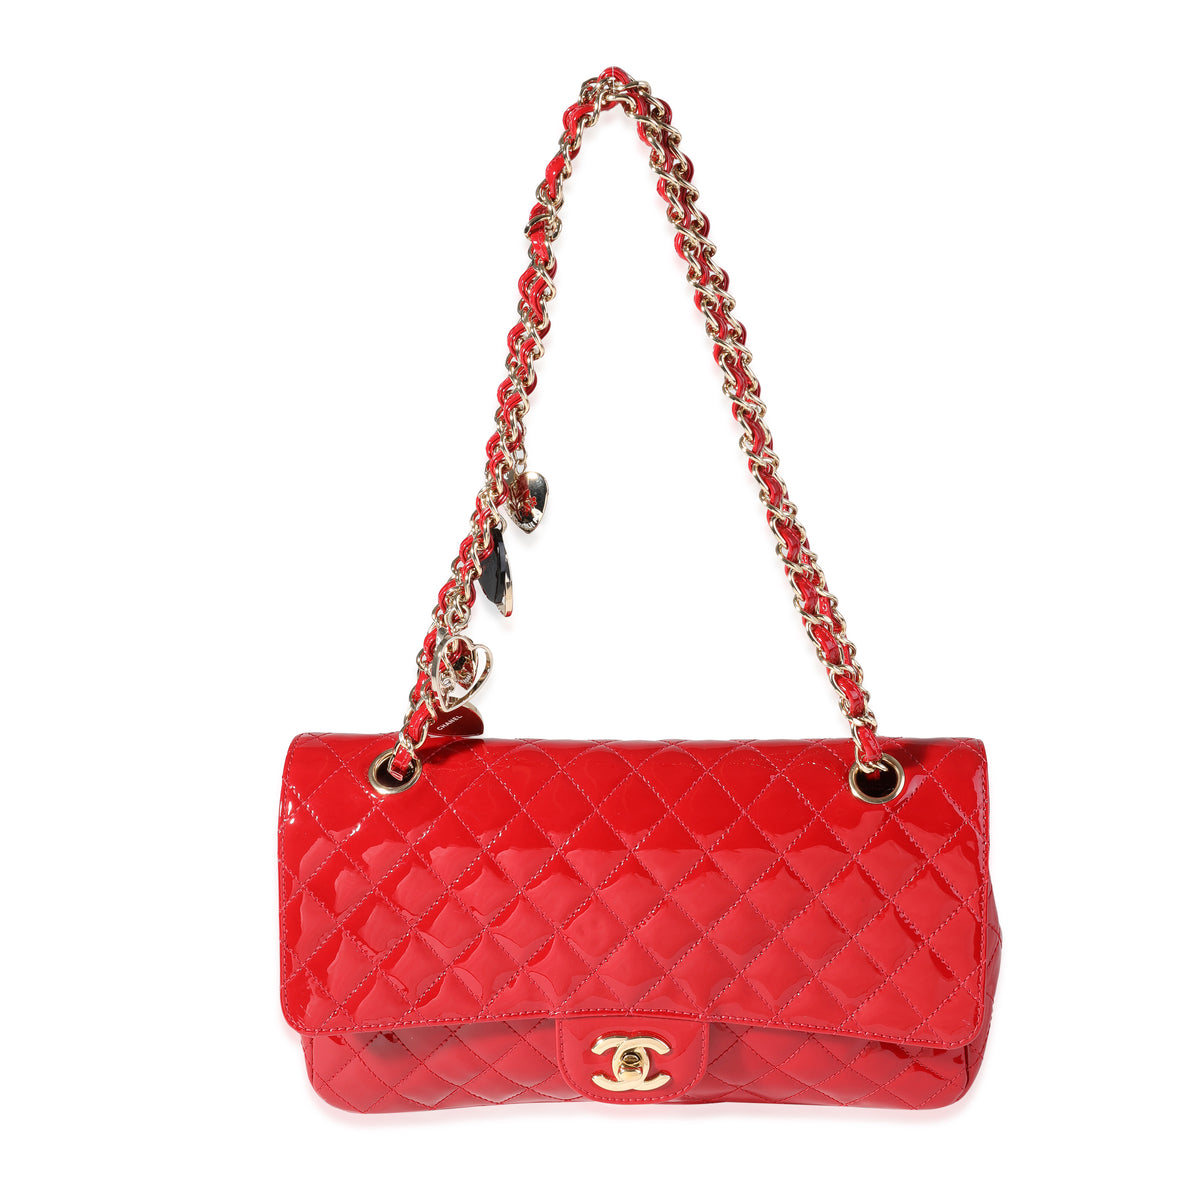 Chanel Red Quilted Patent Leather Valentine's Day Medium Single